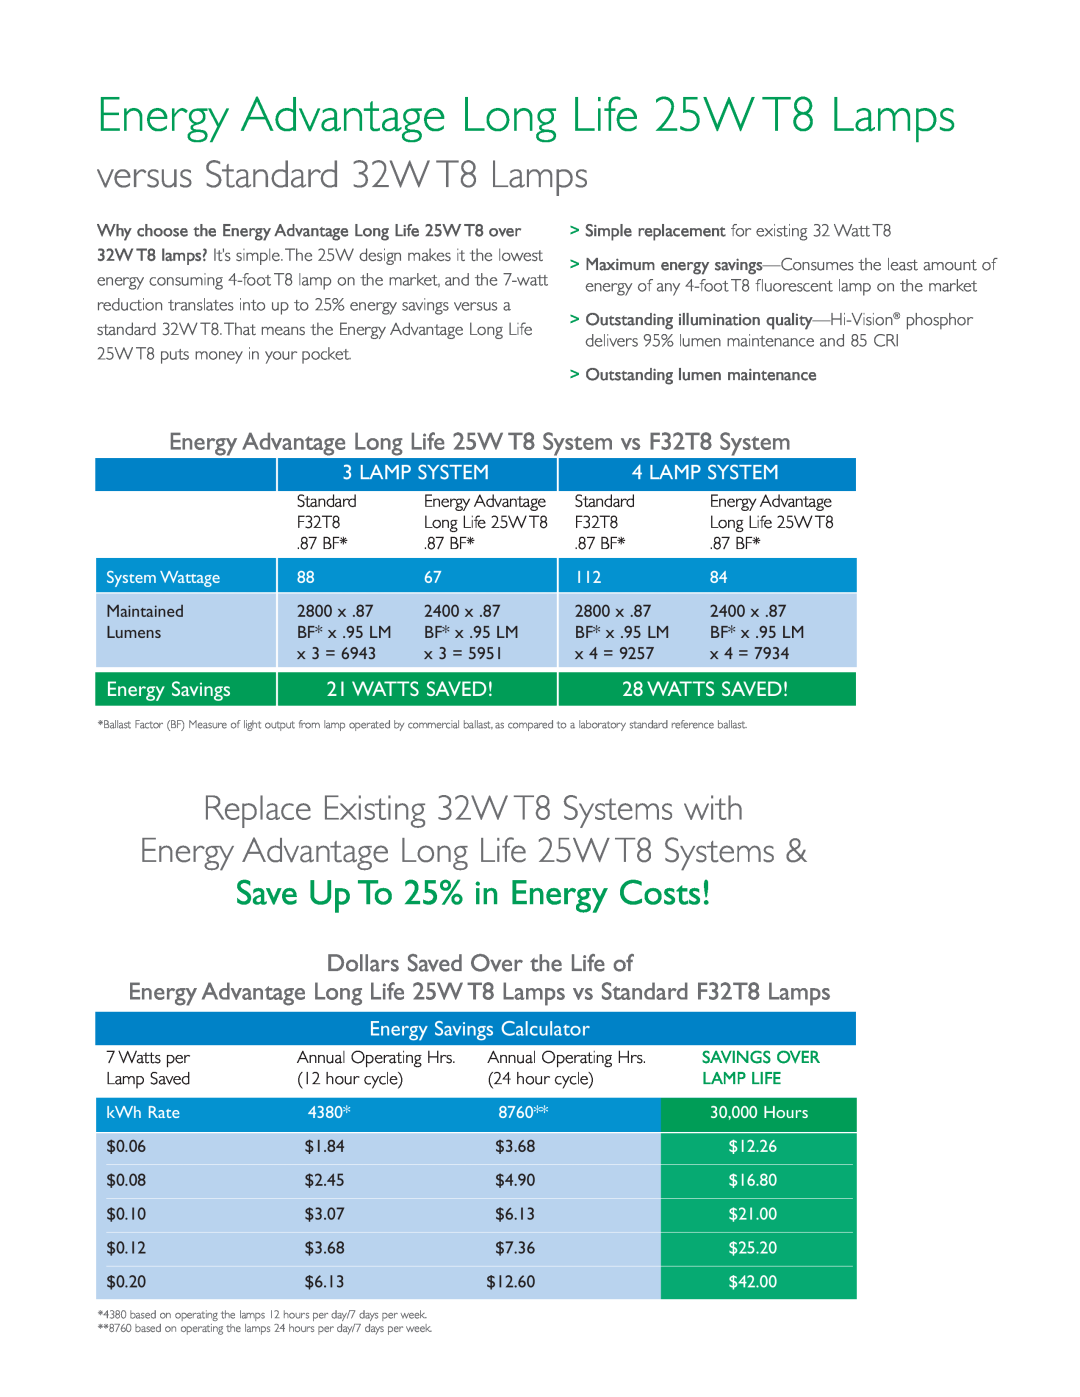 Philips Energy Advantage Long Life 25W T8 Lamps, versus Standard 32W T8 Lamps, Replace Existing 32W T8 Systems with 